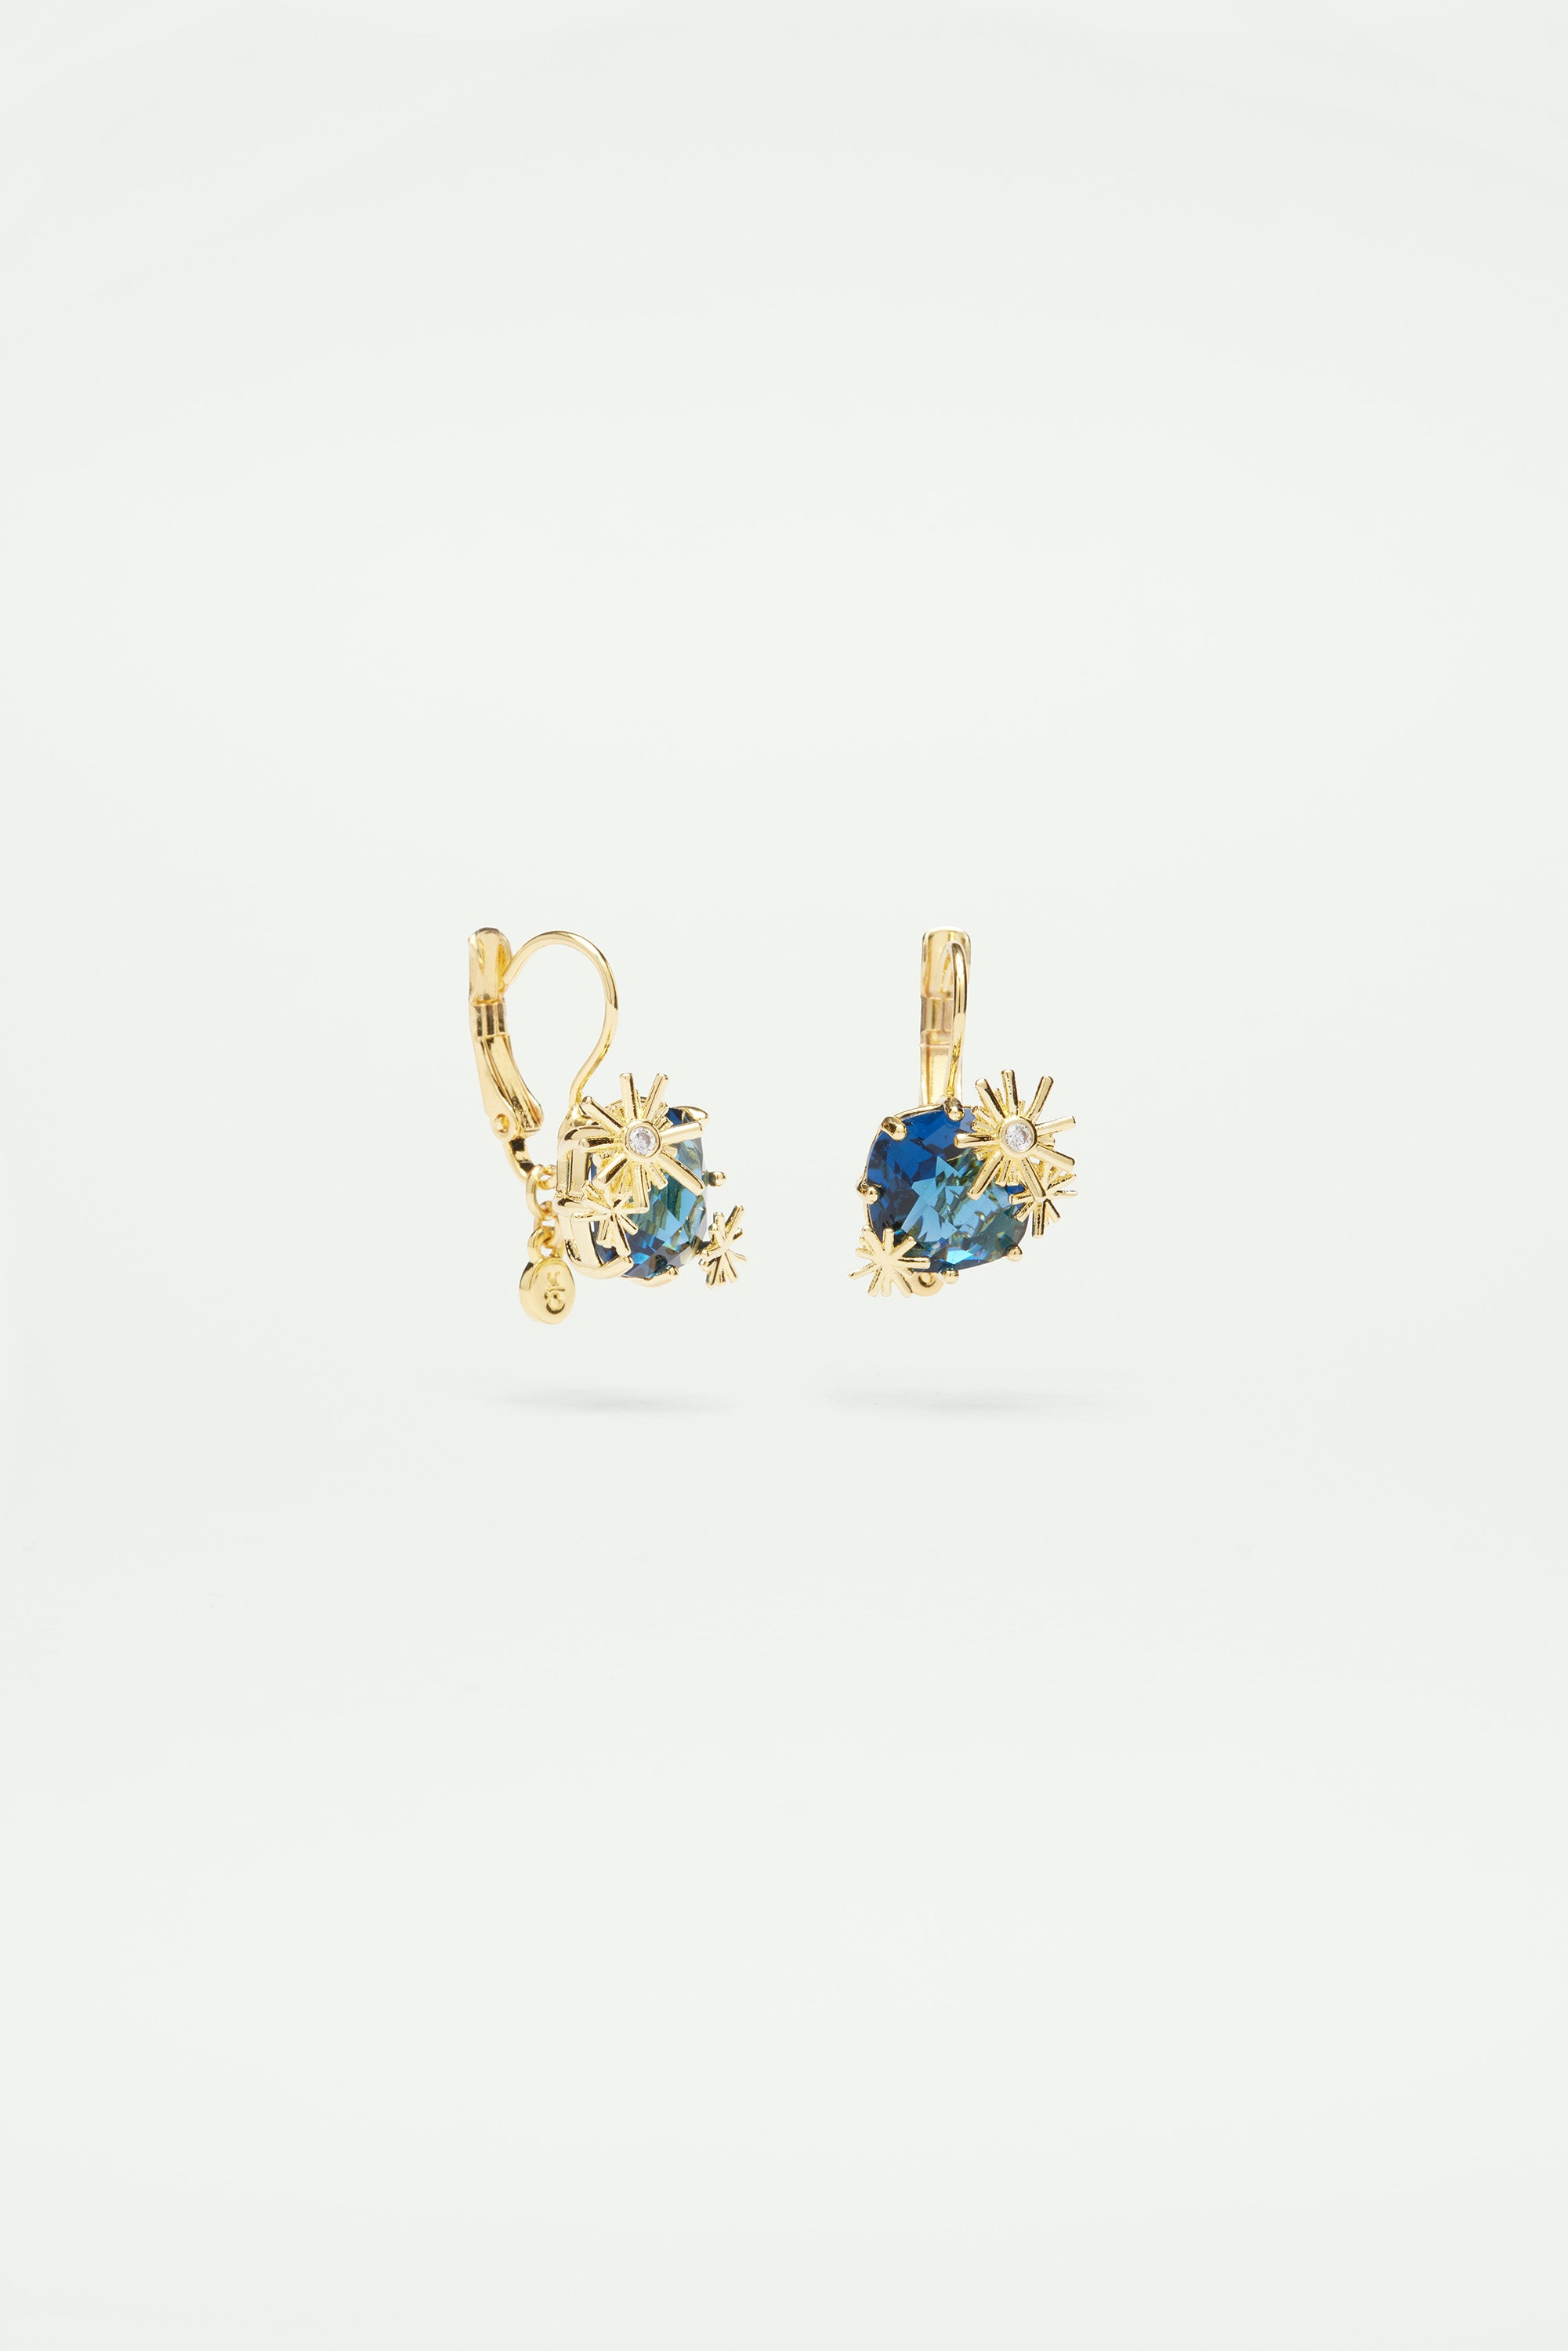 Gold stars and square stone sleeper earrings